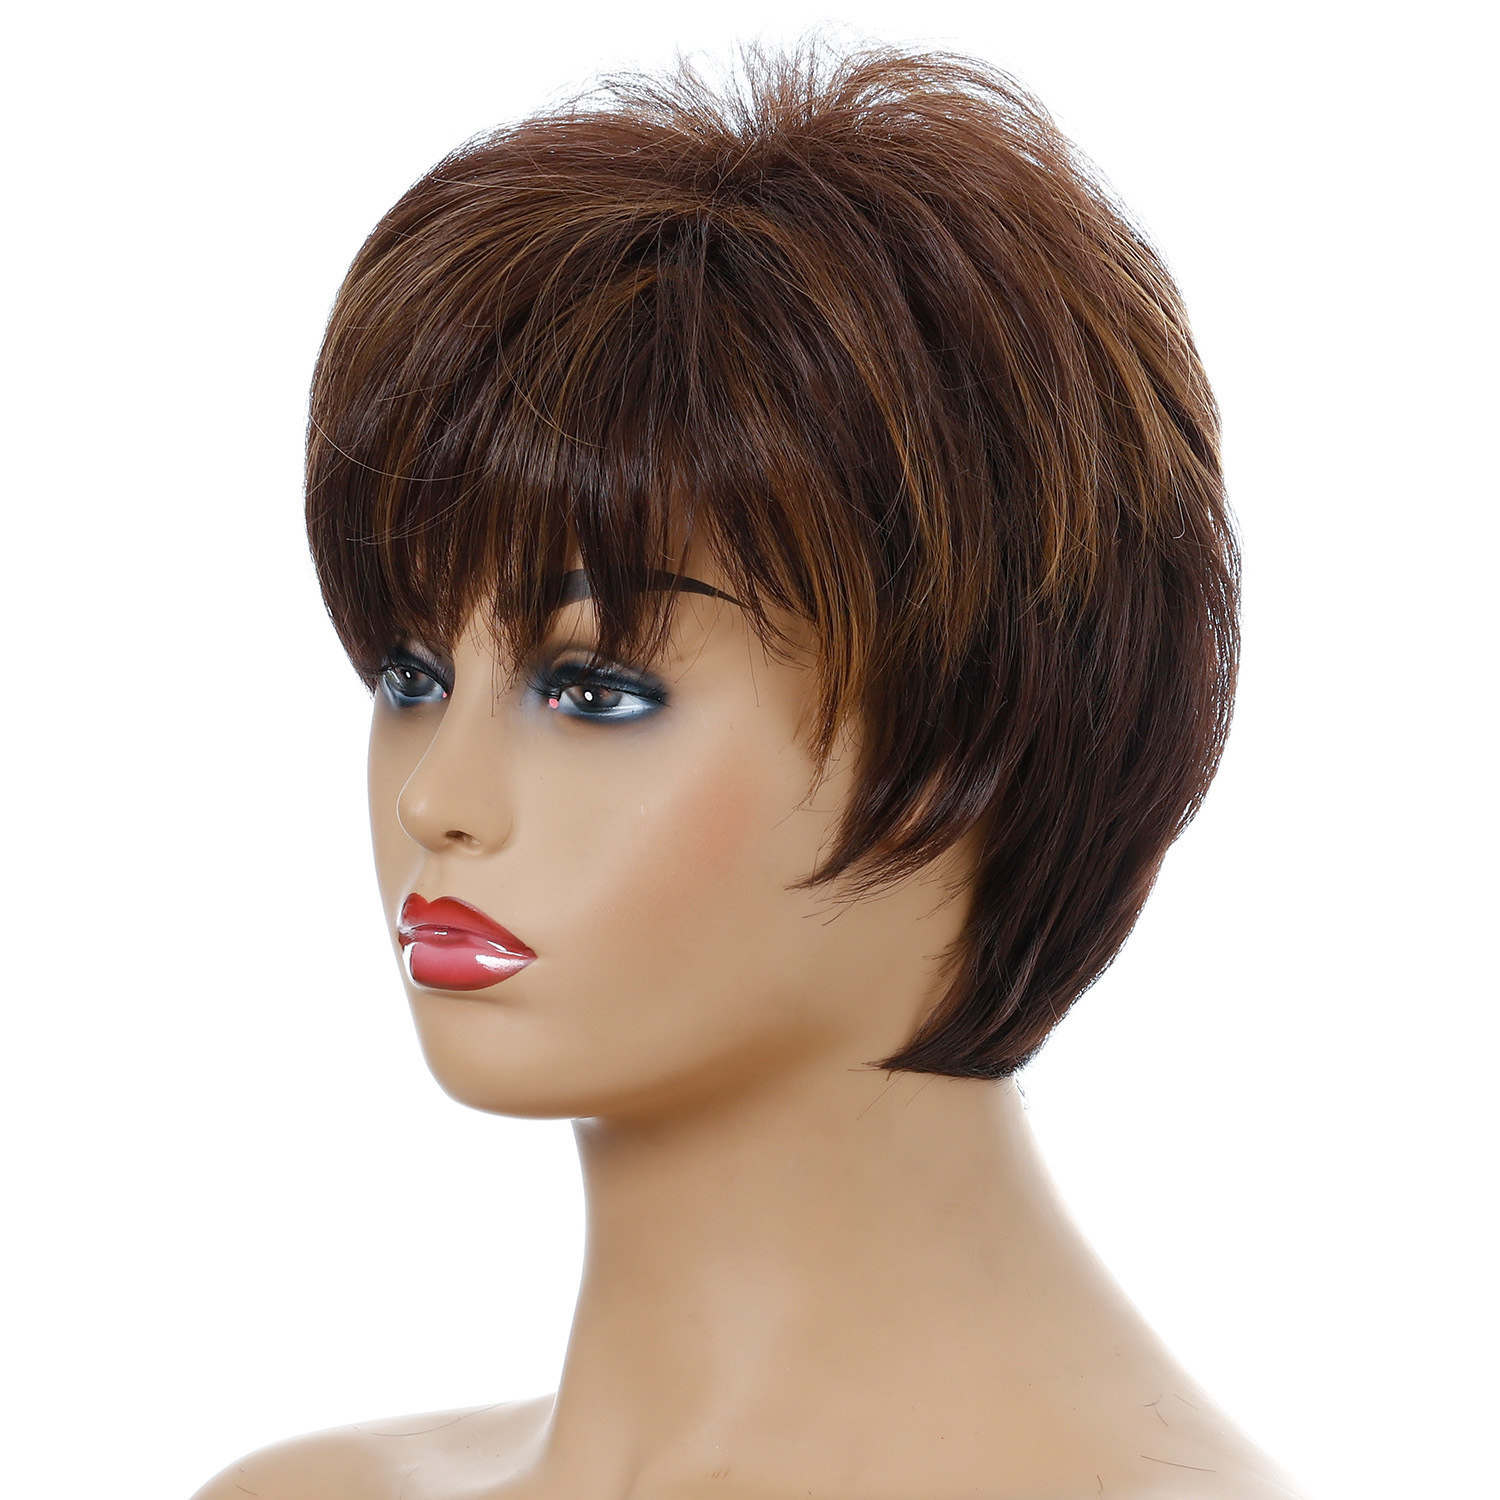 A collection of small curly wigs for women featuring a stylish light brown short curly synthetic wig